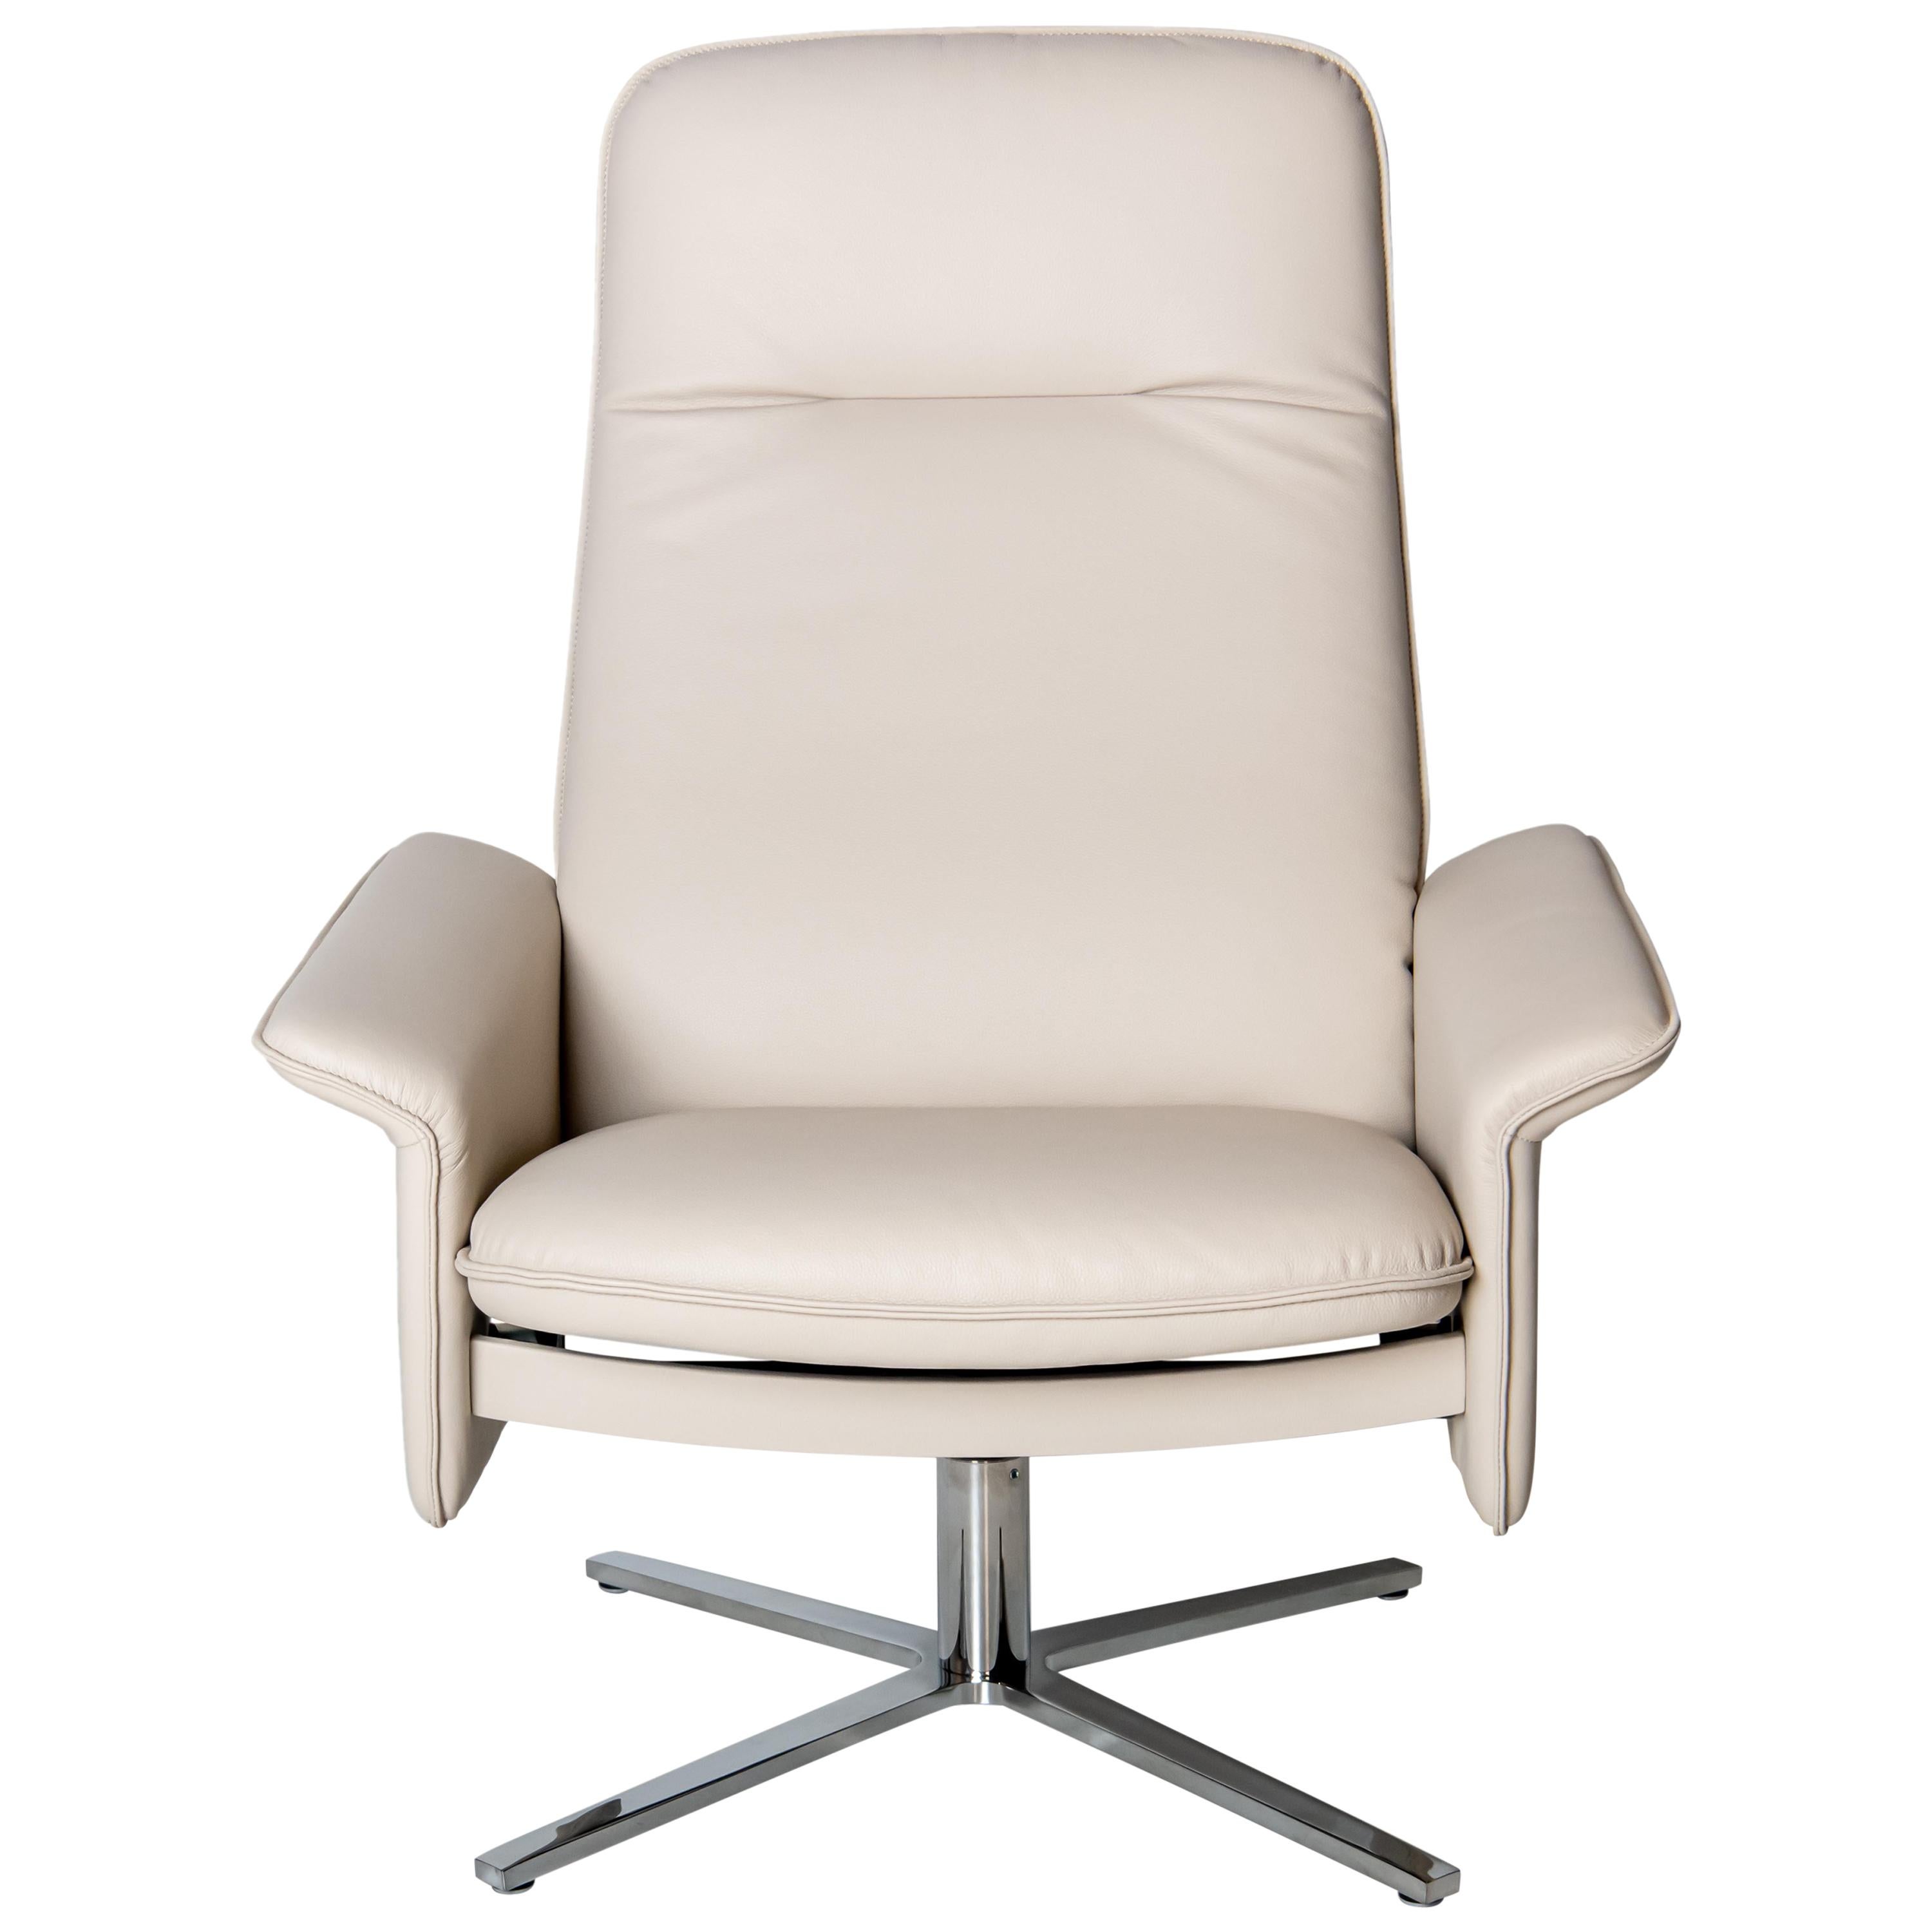 De Sede DS 55 High Back Chair in White Leather Upholstery by De Sede Design Team For Sale